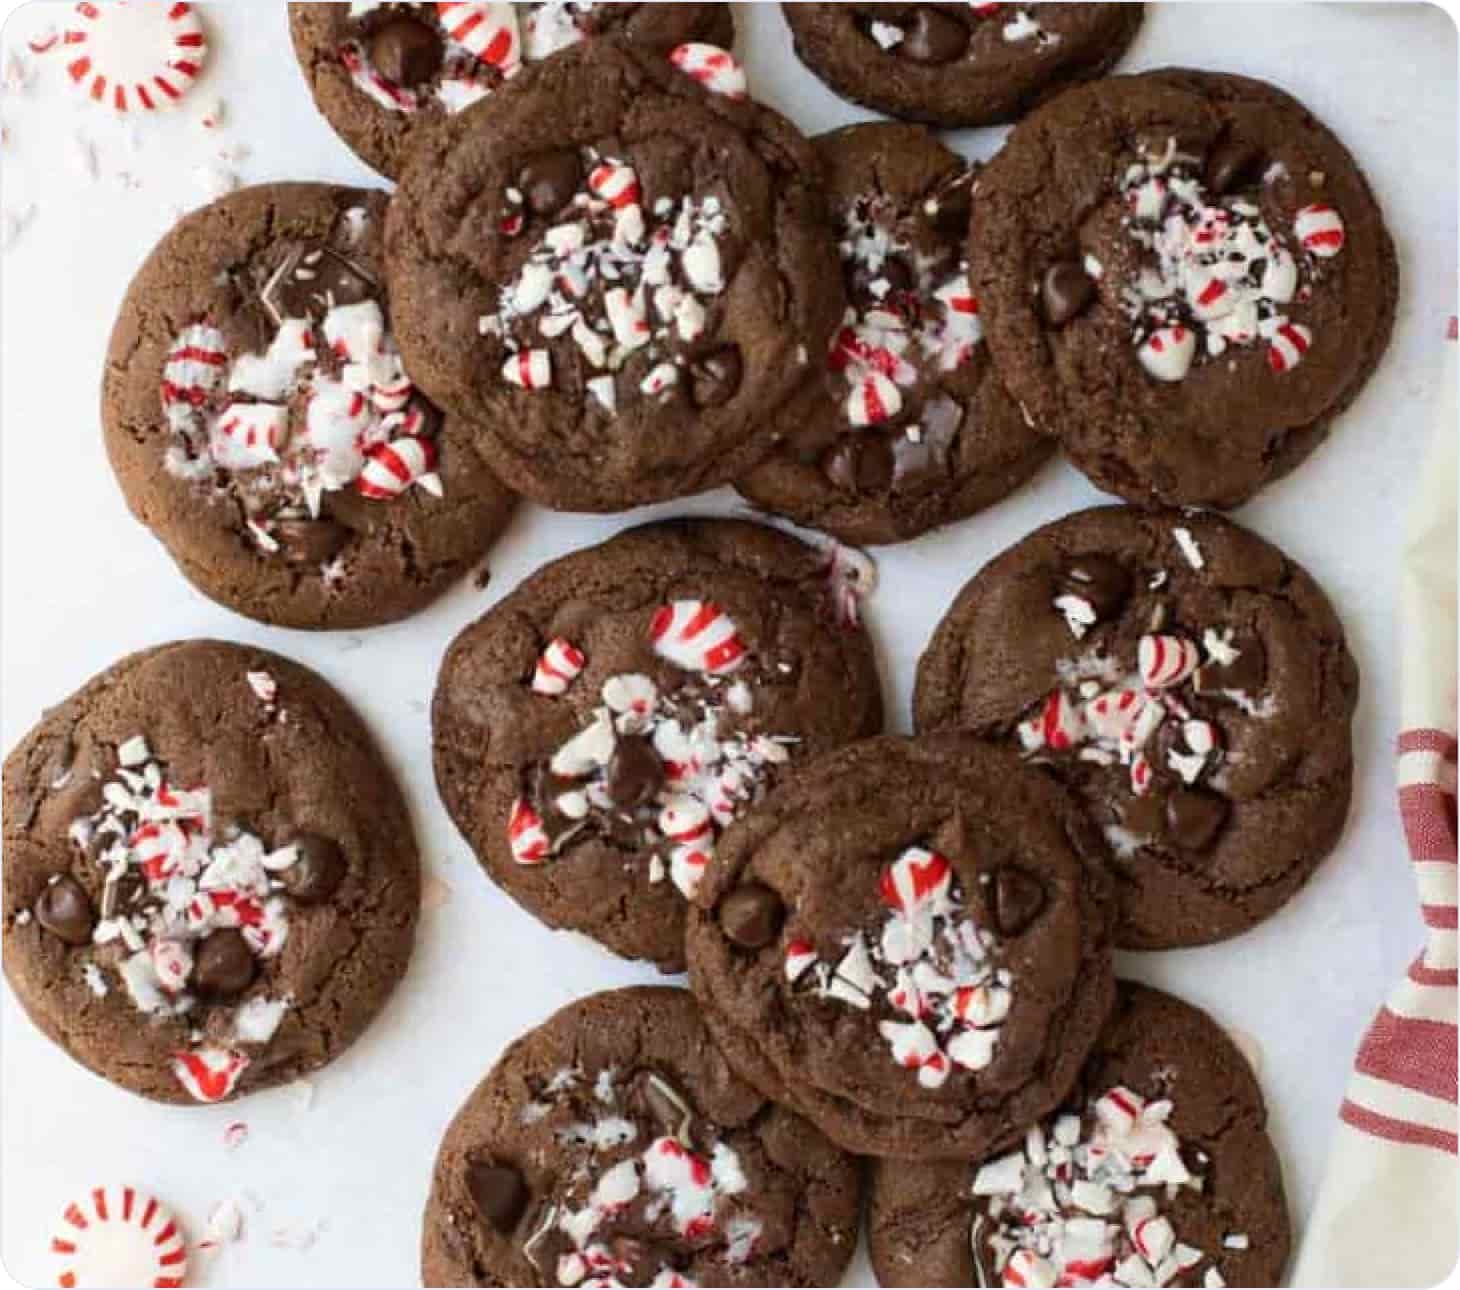 Chocolate cookies with crushed lollipop sticks